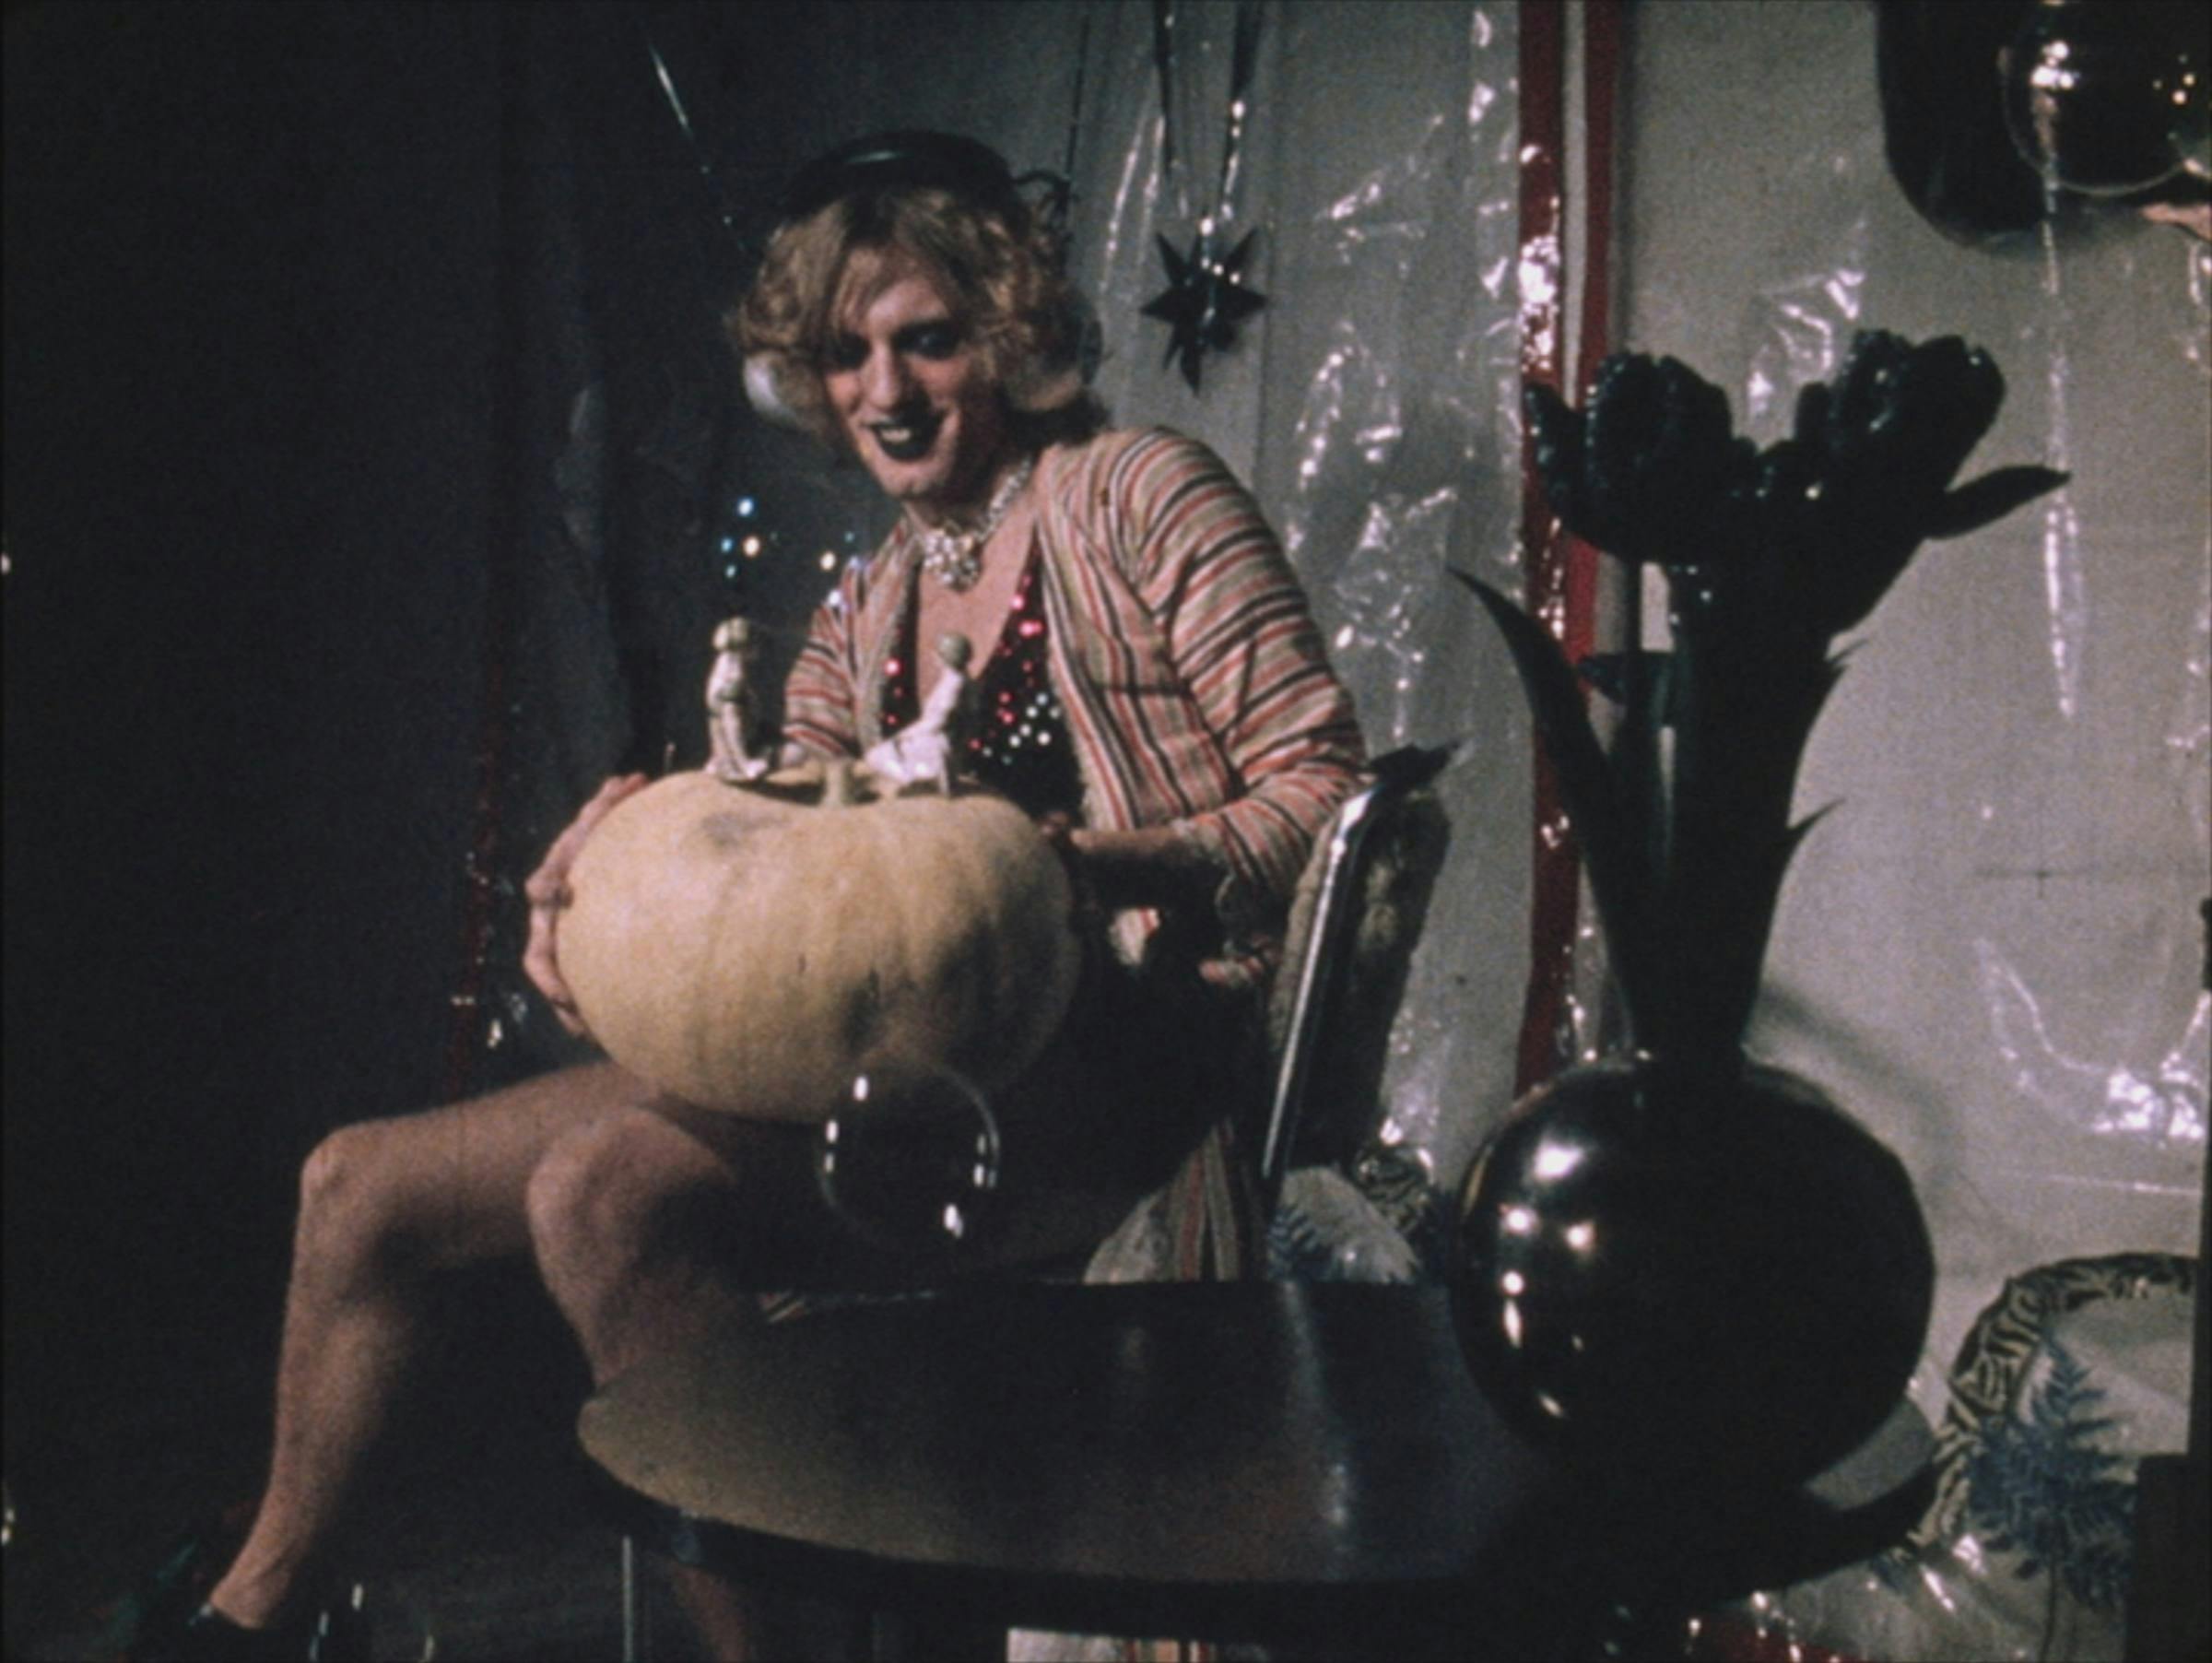 A femme person with blond curly hair sits at a circular table with a black vase on it. They hold a pumpkin with two figures on top.